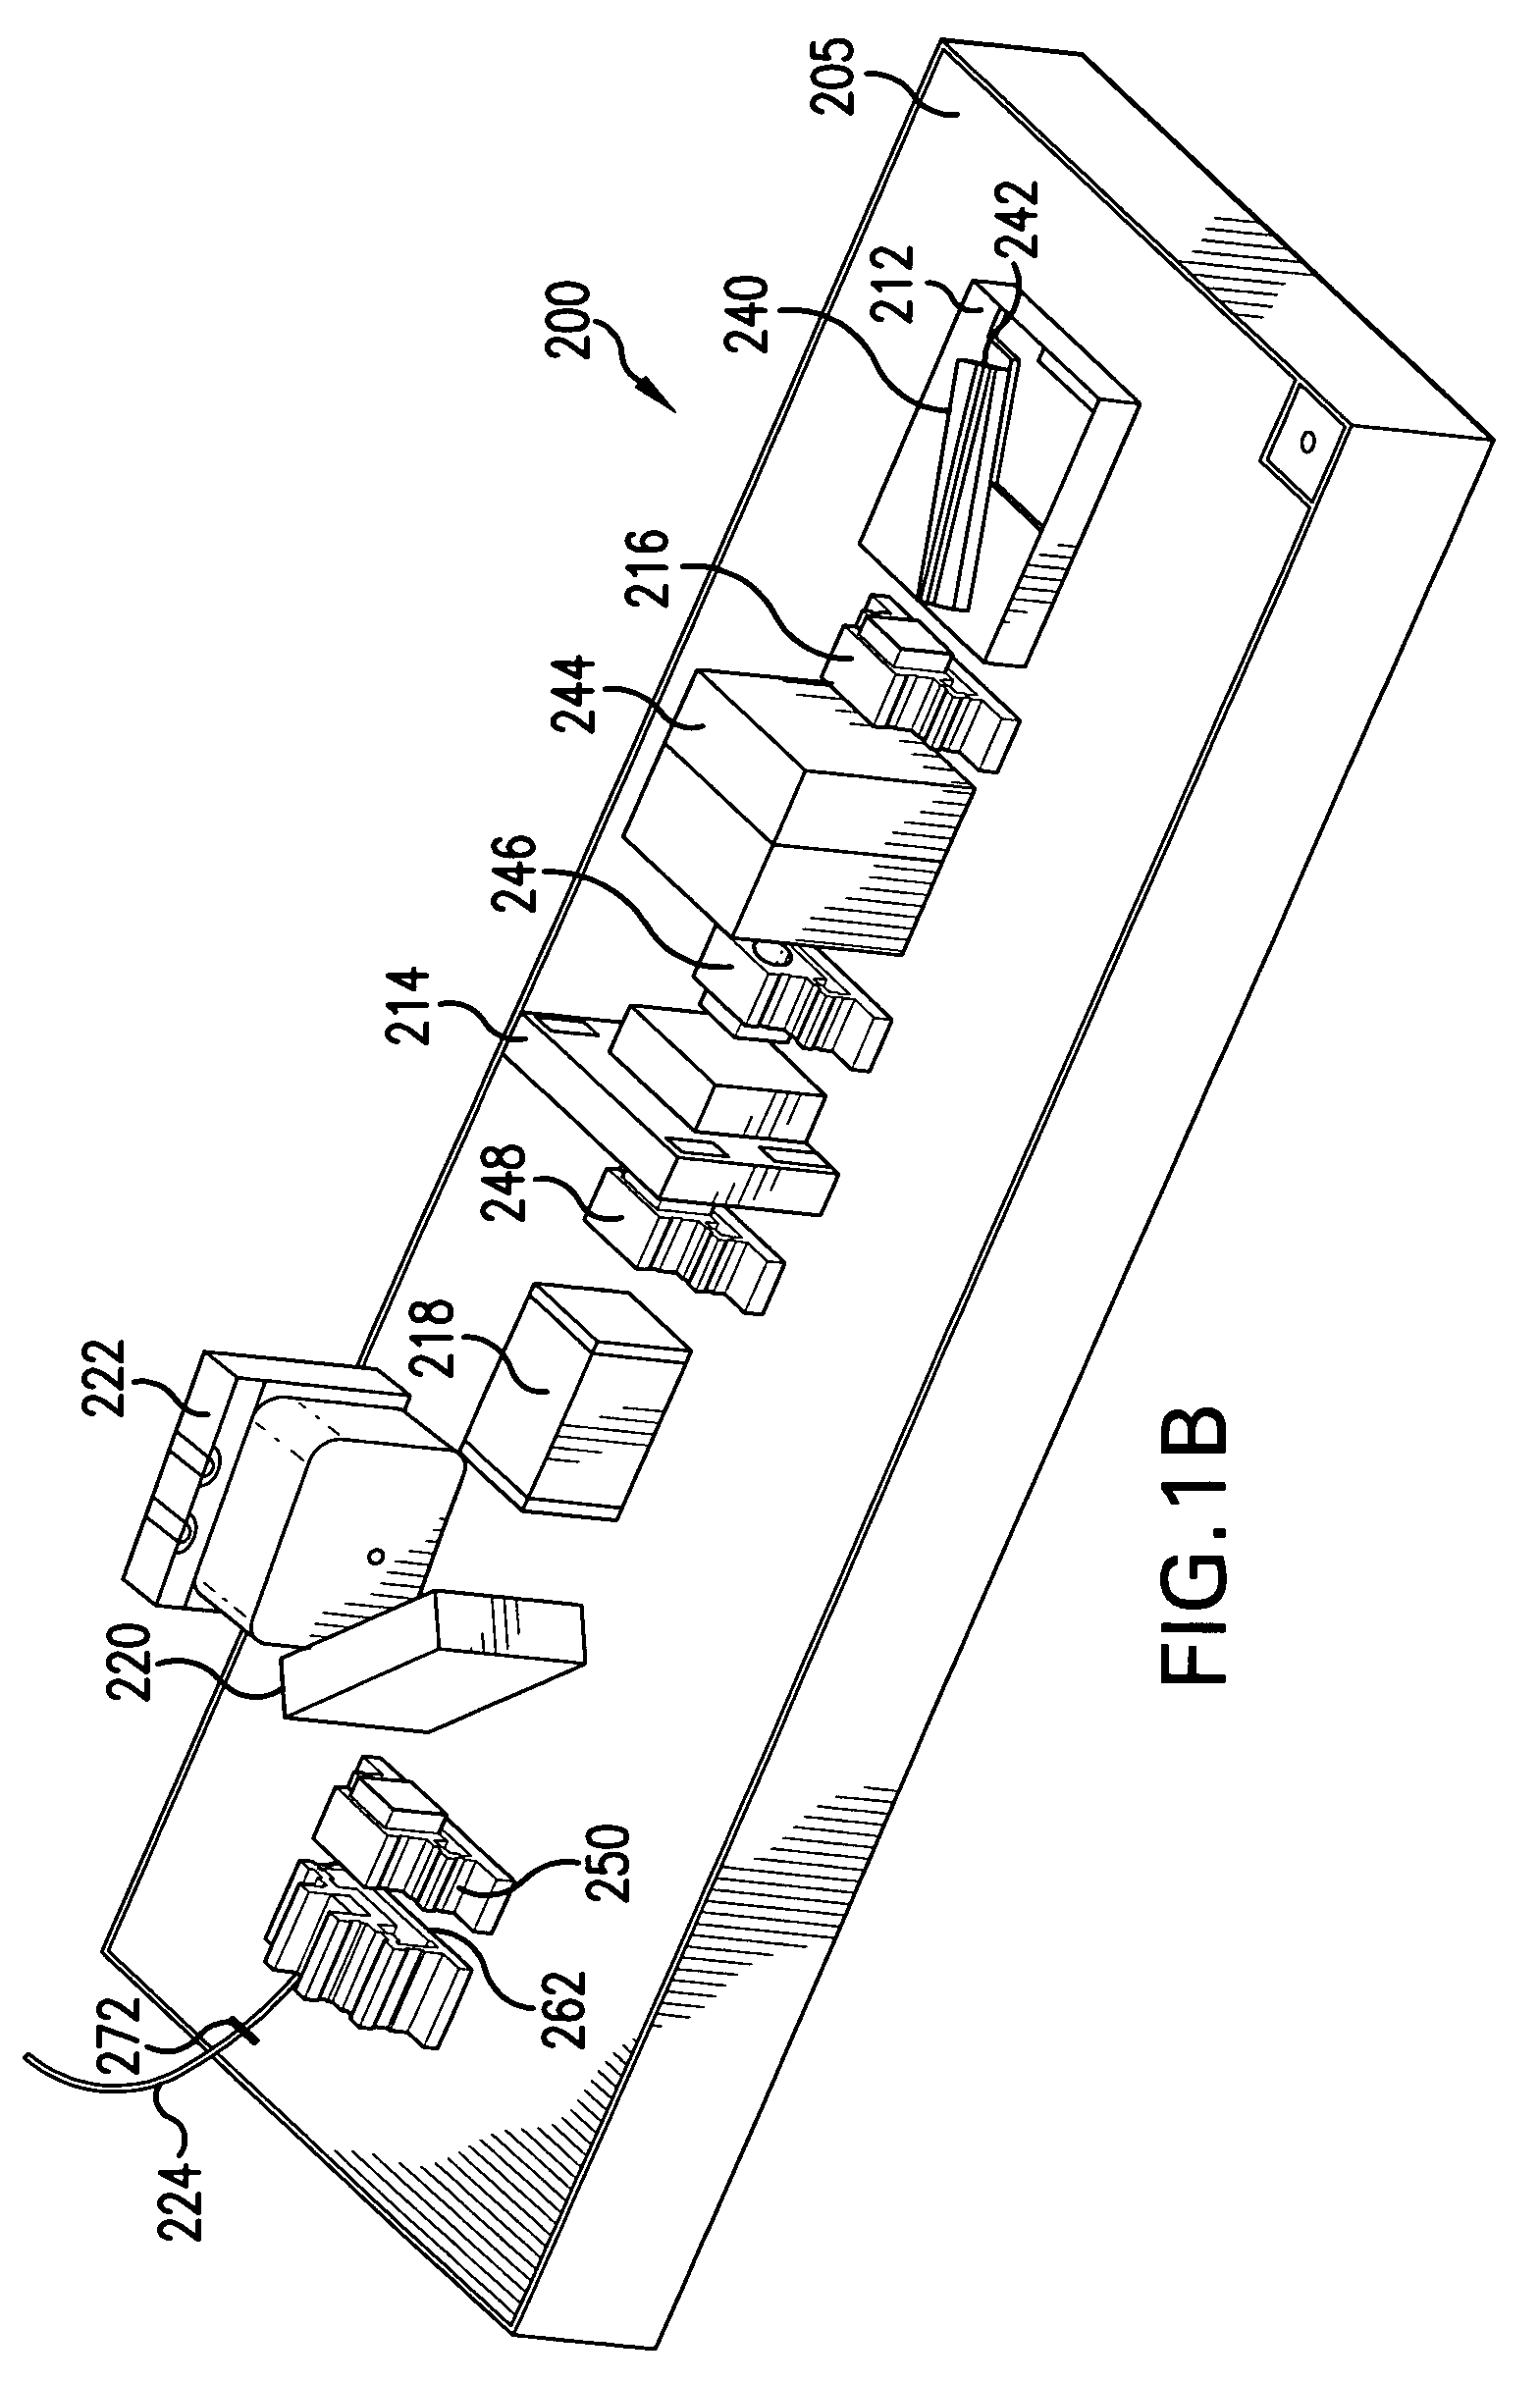 Method and system for spectral stitching of tunable semiconductor sources